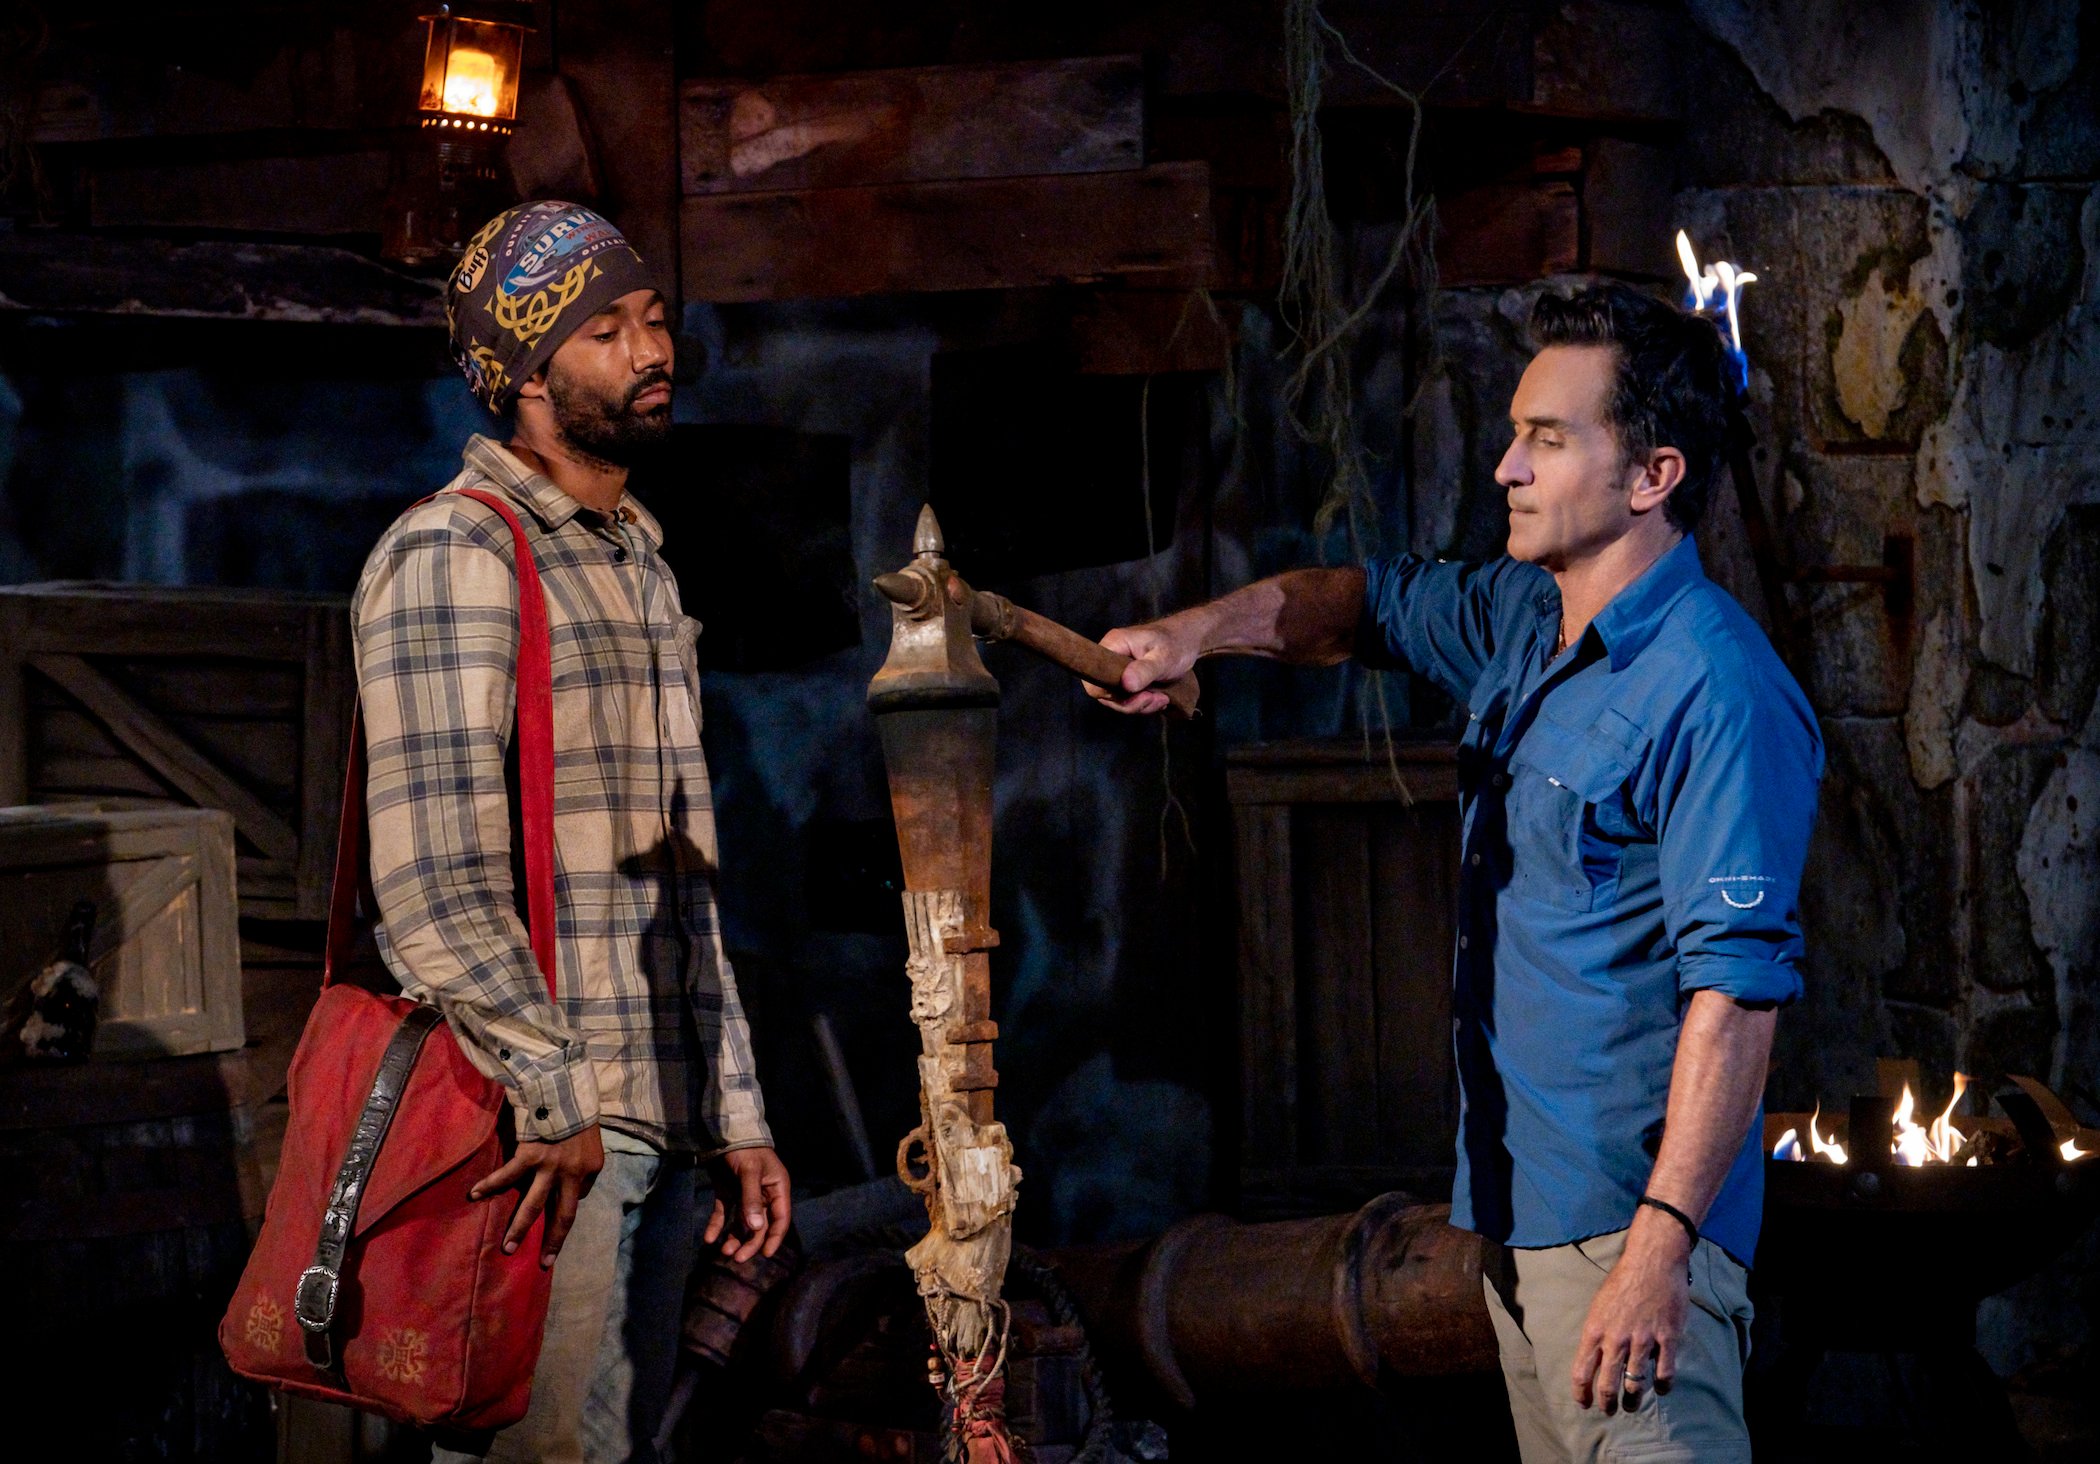 Jeff Probst extinguishes Wendell Holland's torch at Tribal Council on 'Survivor: Winners at War.' Jeff Probst will return for 'Survivor' Season 41